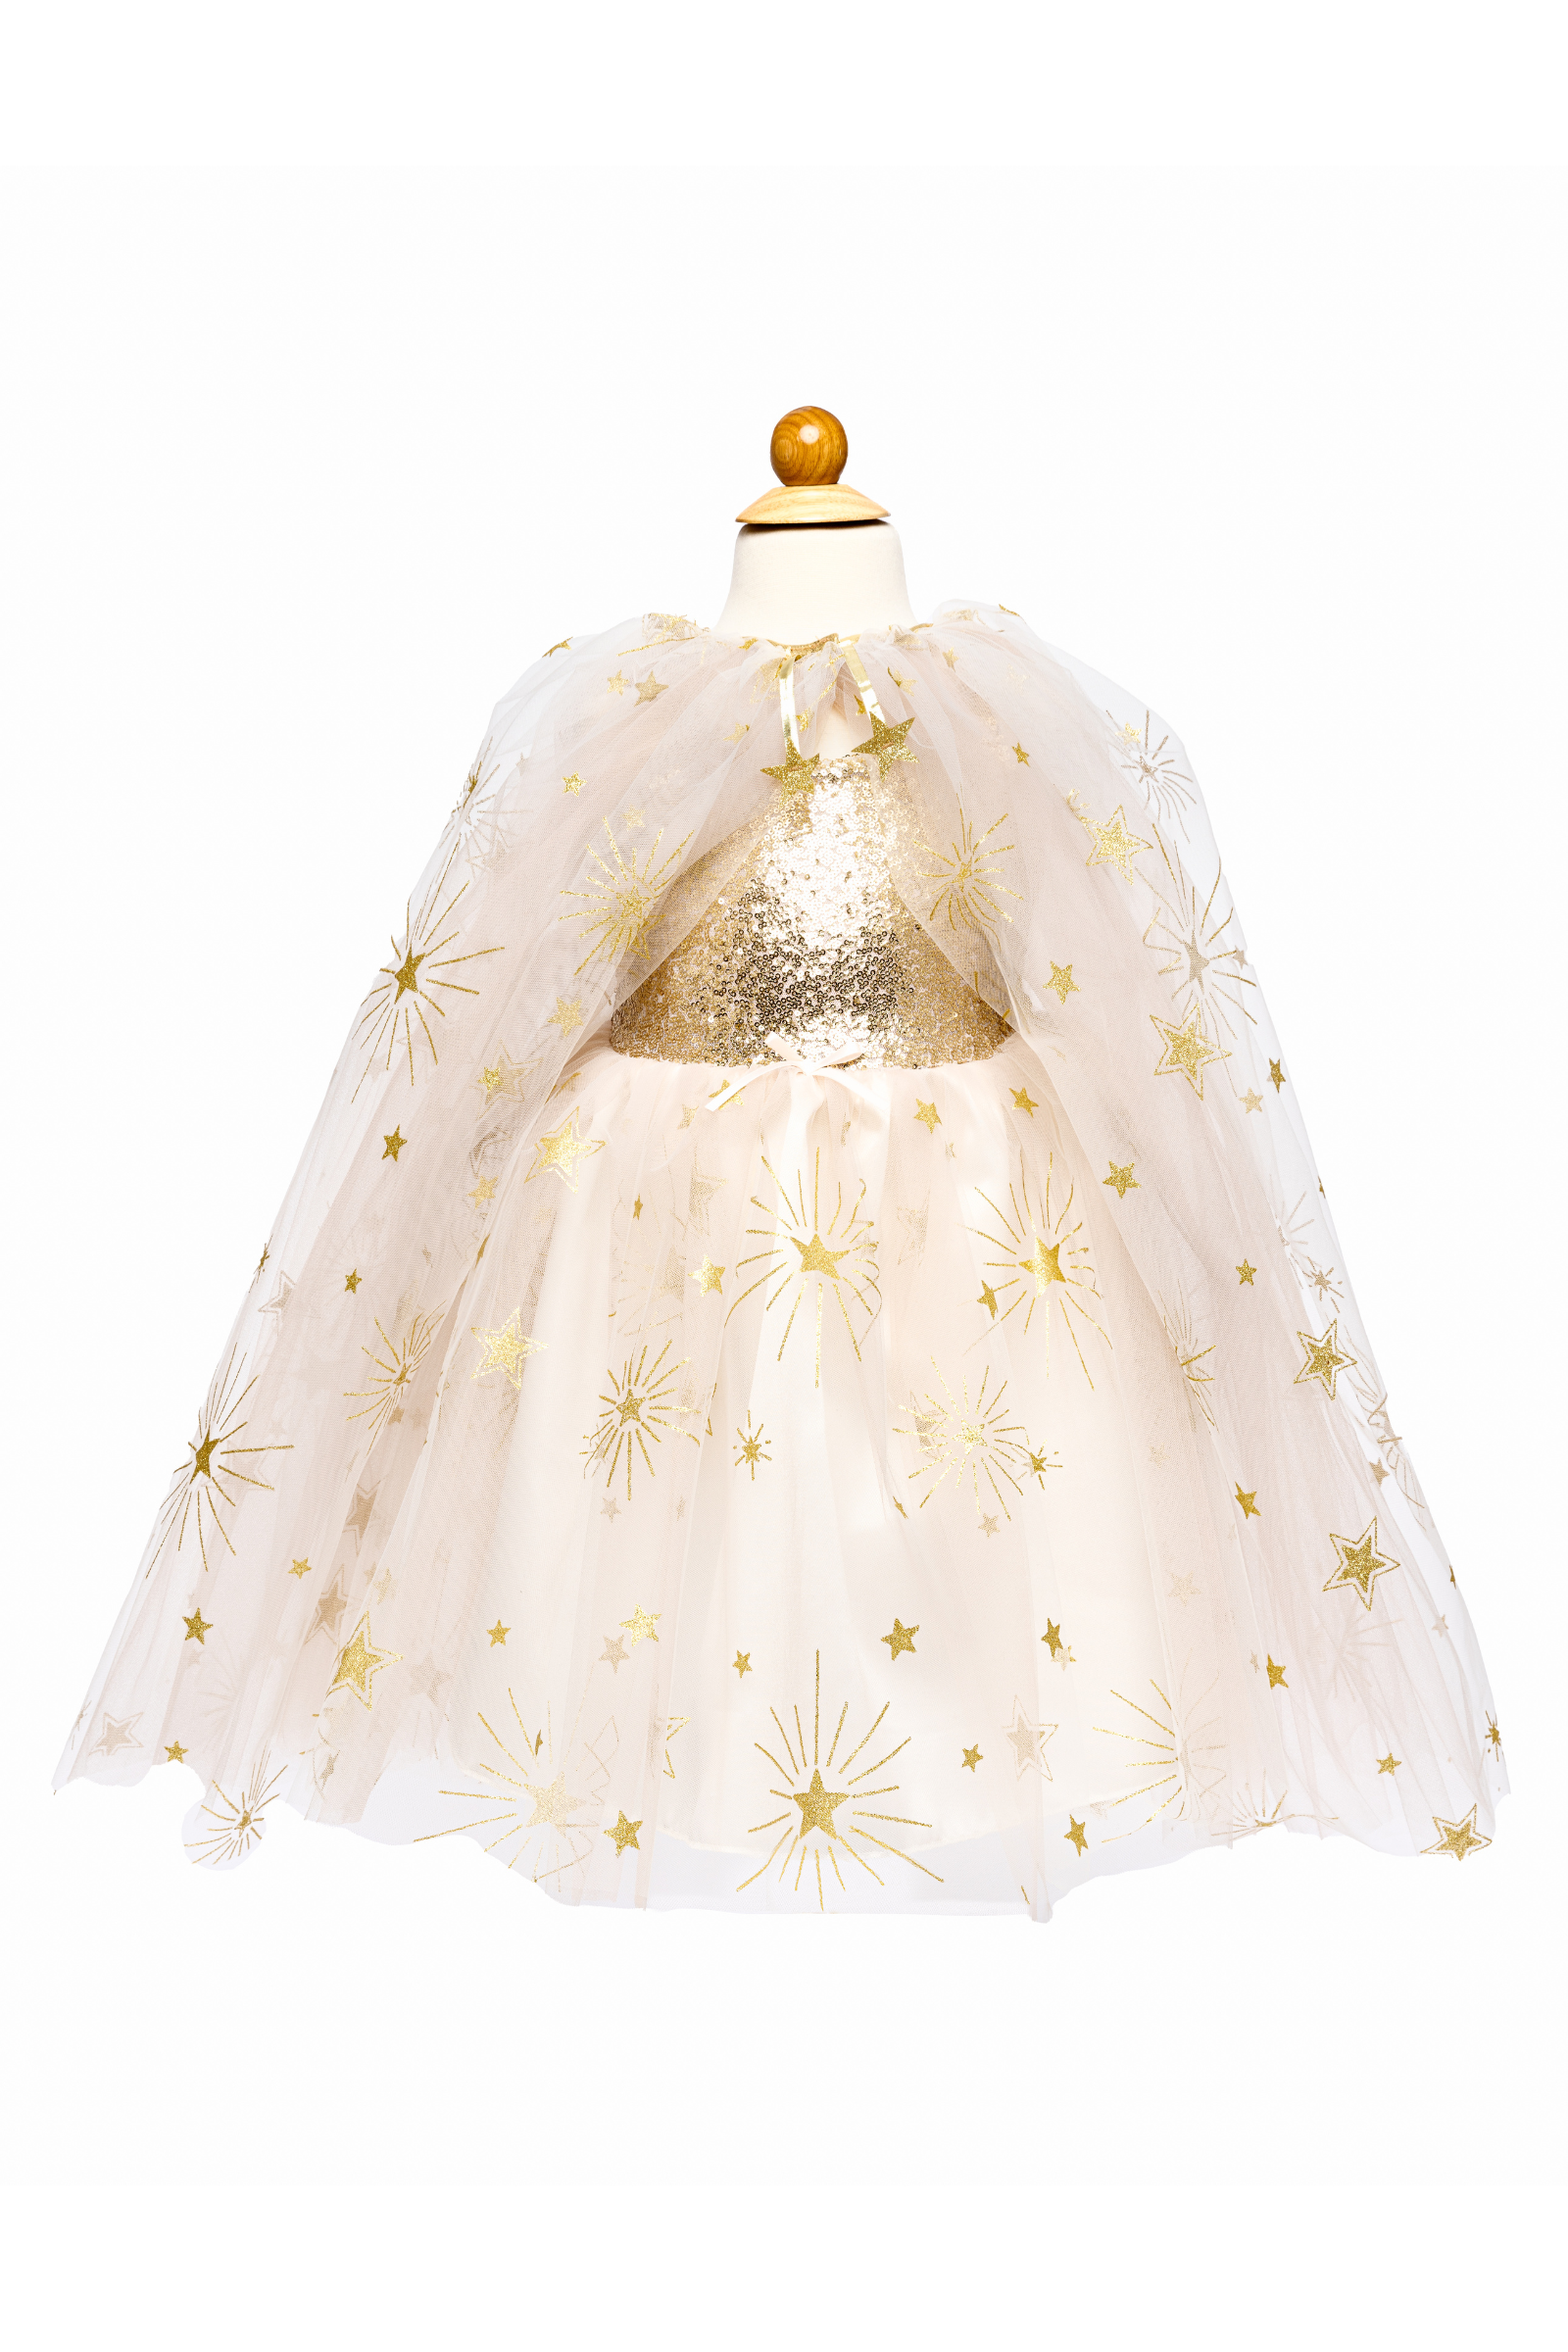 Glam Party Gold Cape